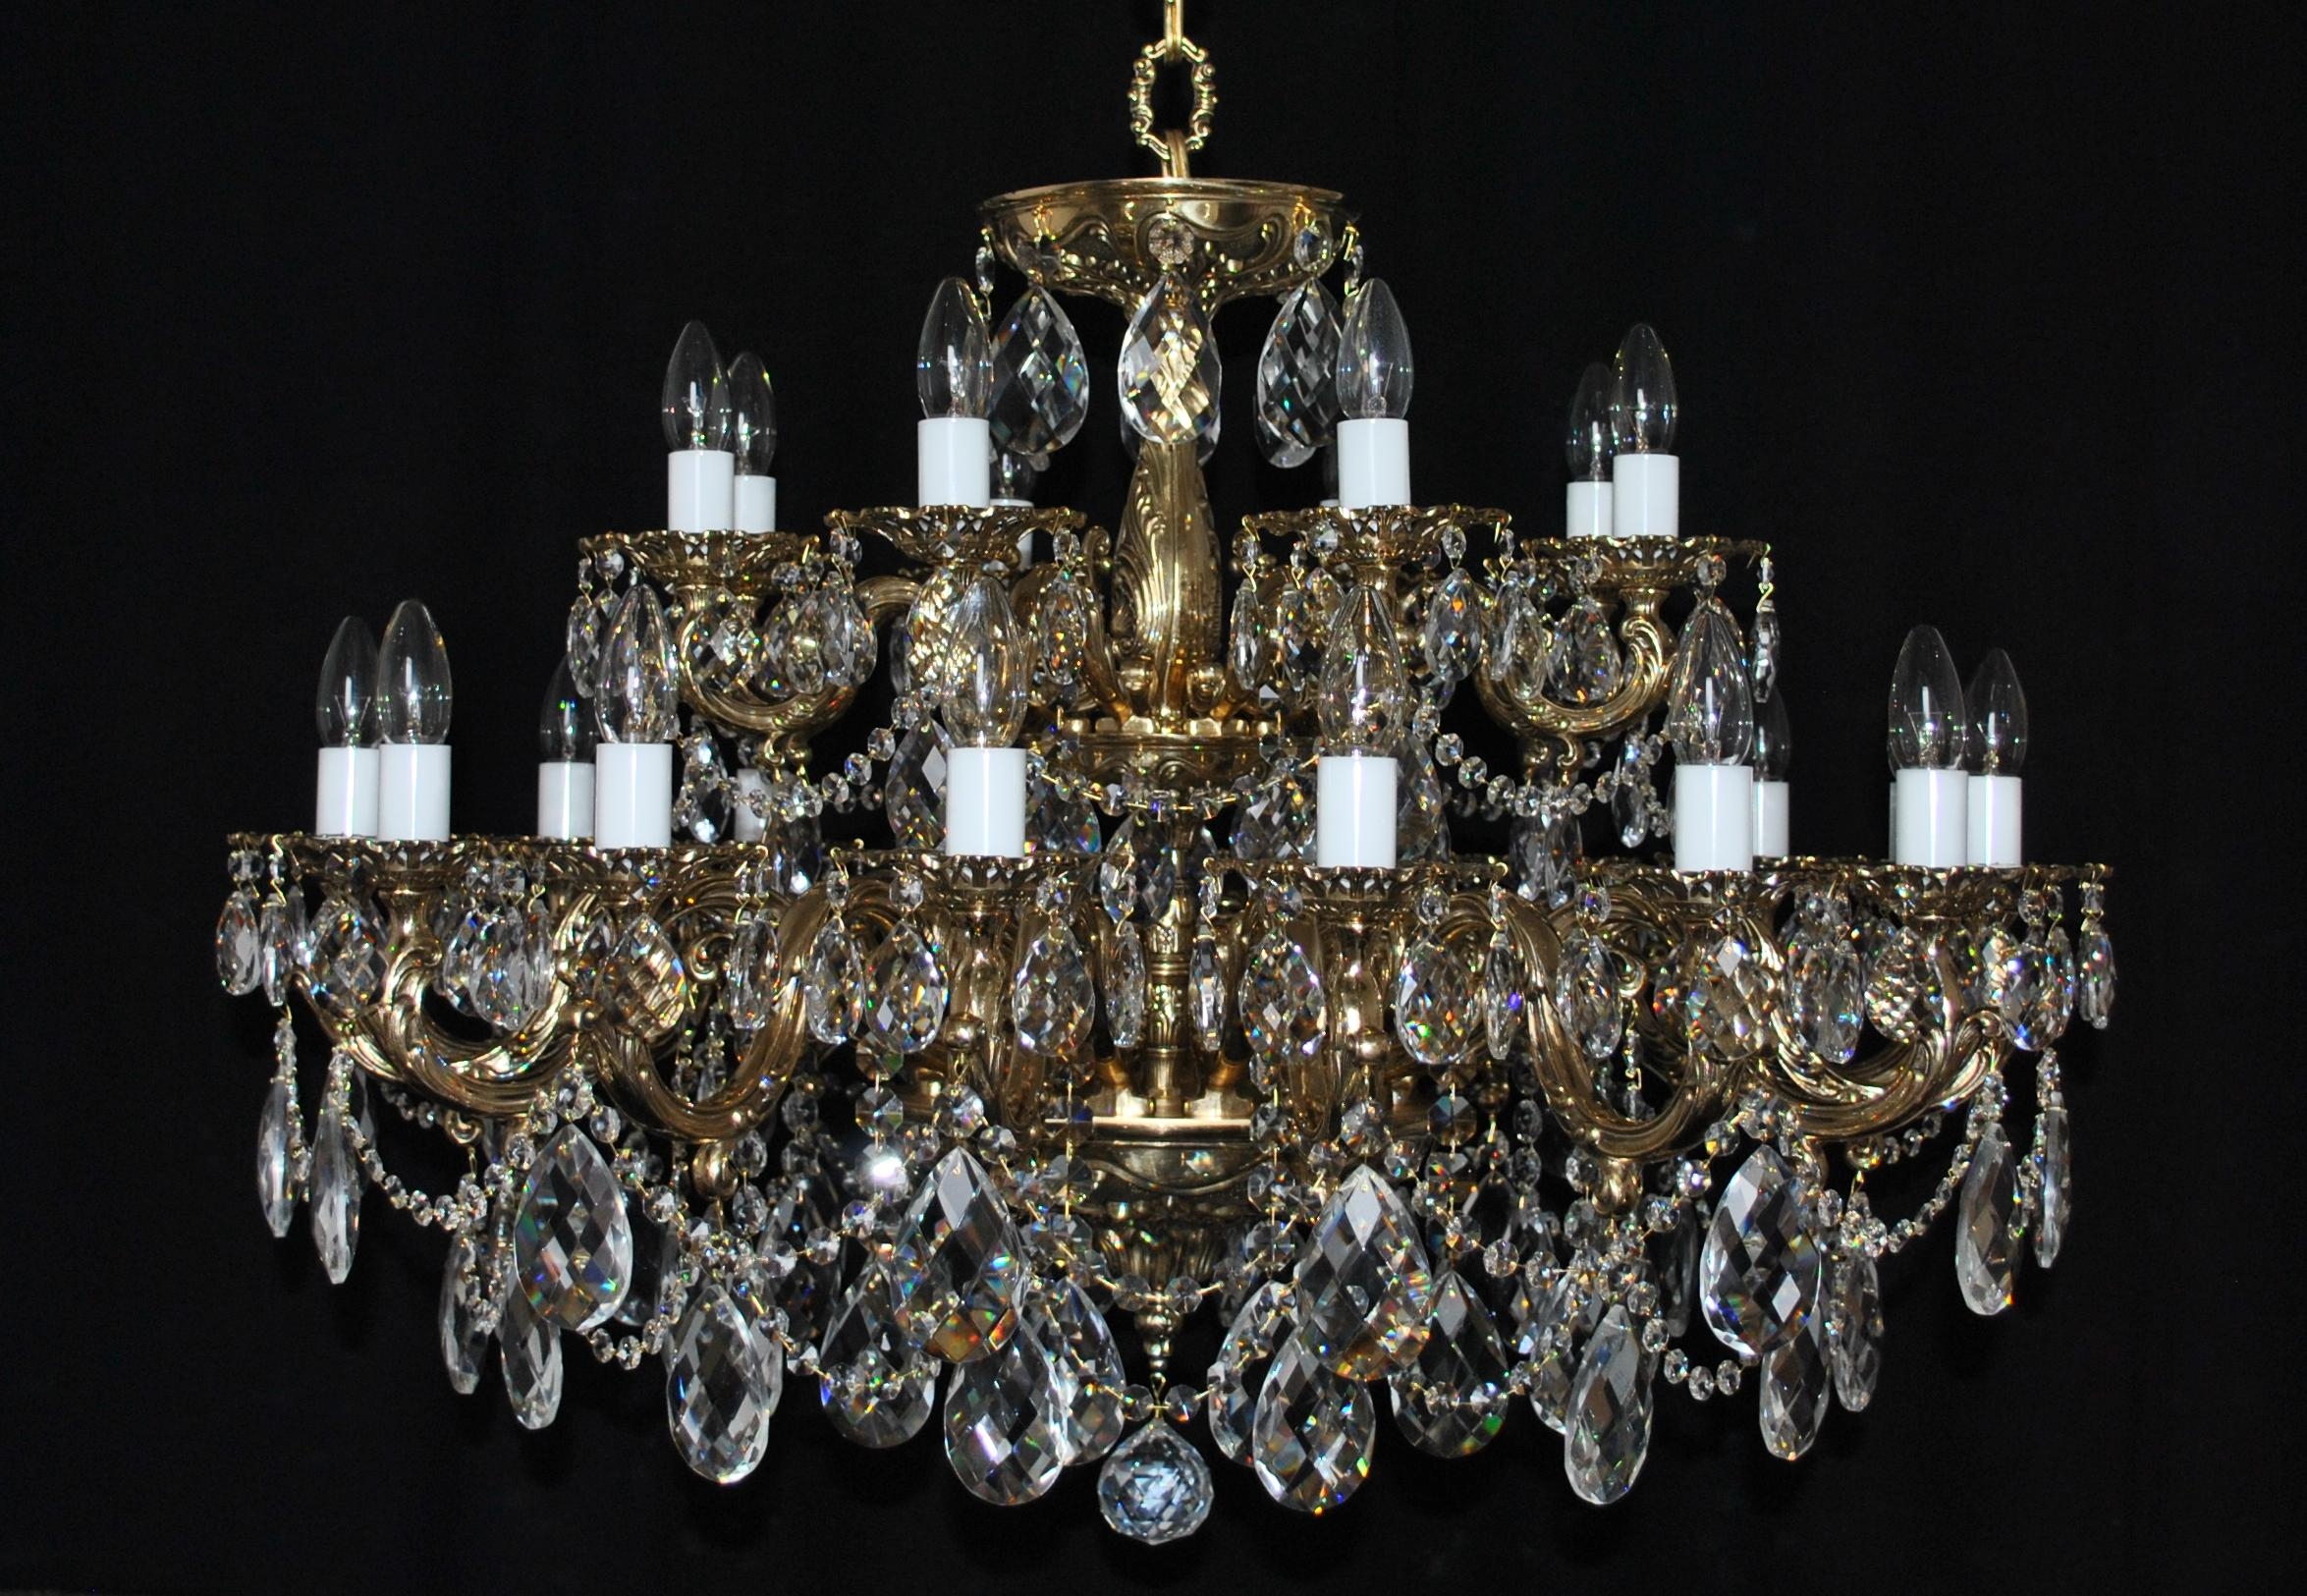 8 Arms Cast brass crystal floor lamp with crystal spike & crystal almonds